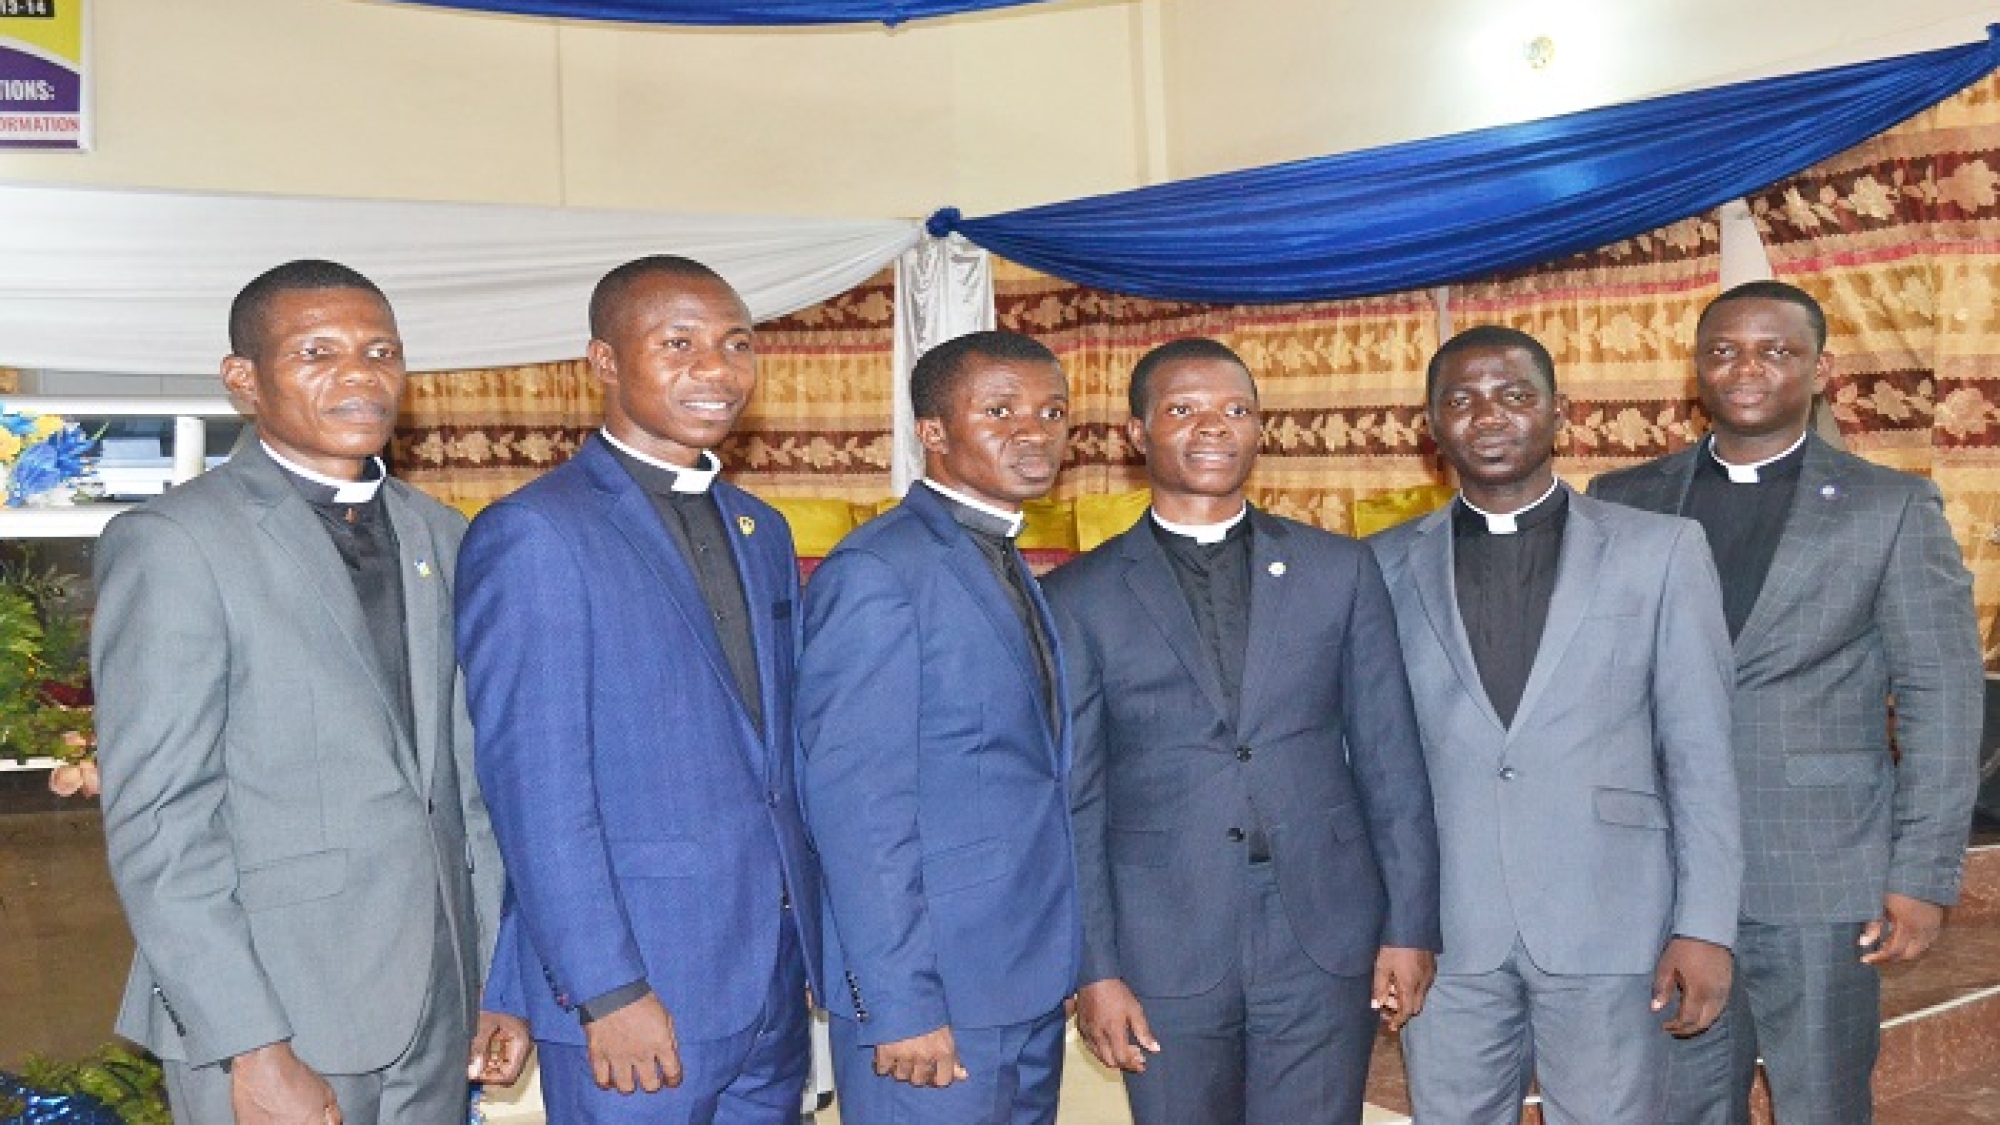 THE SIX ORDAINED PASTORS (1)